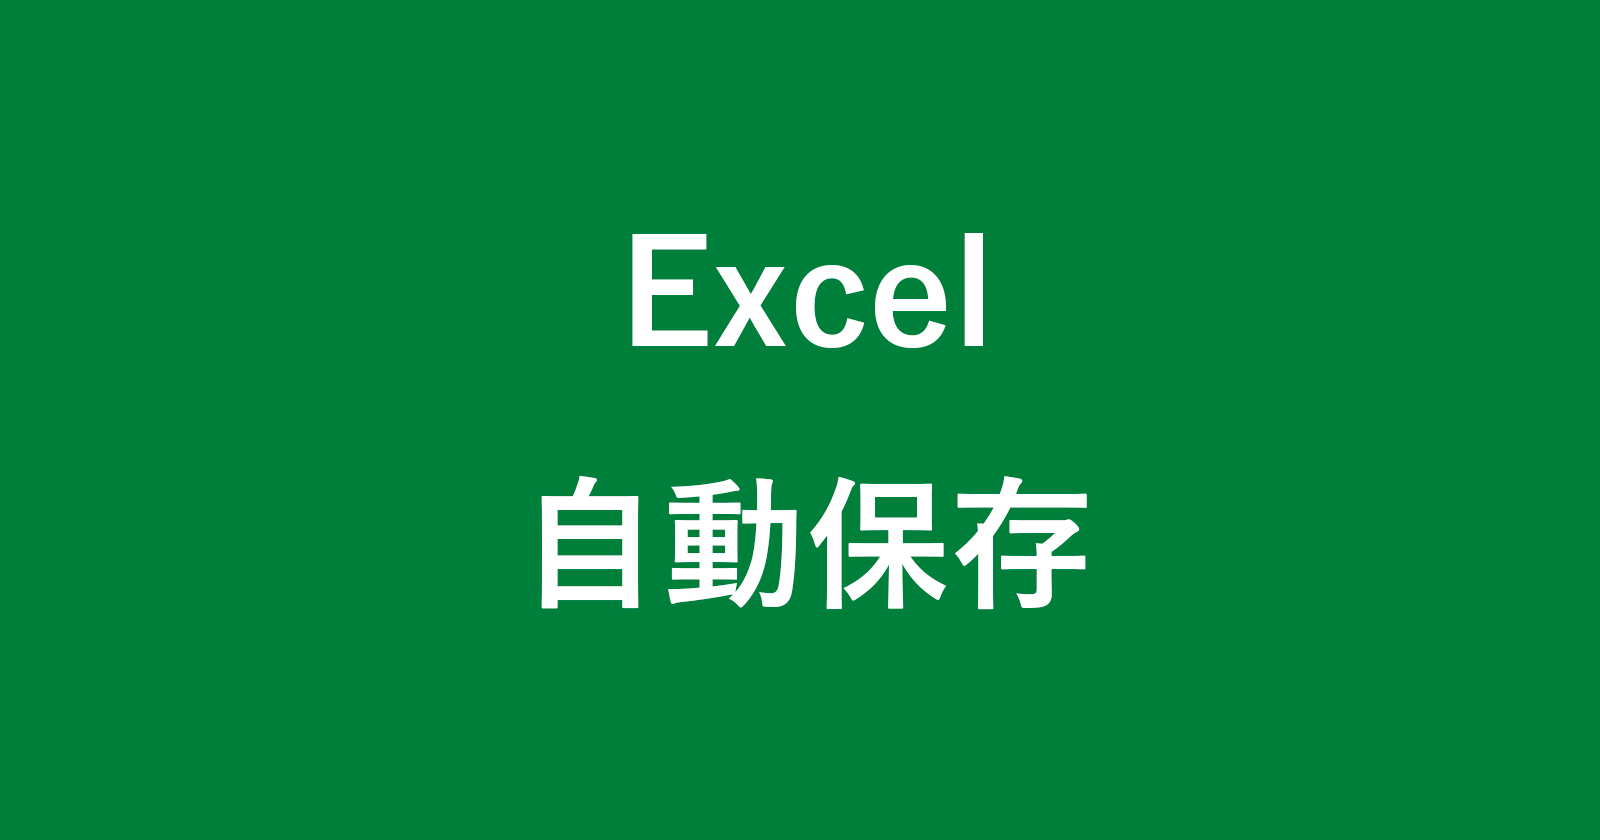 excel automatically backup